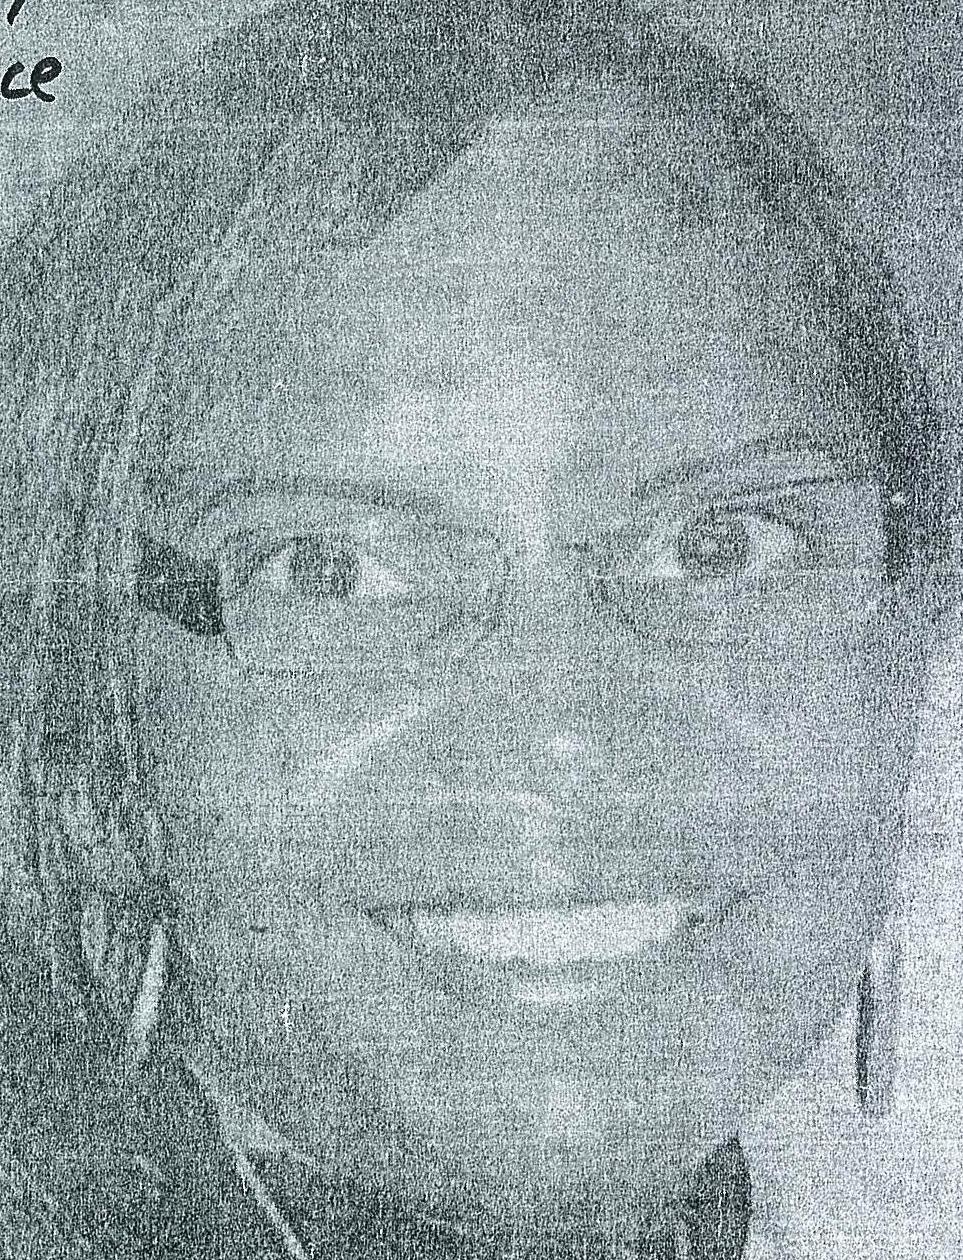 Police Seek Ethel Durant, Second Time Missing in Four Months